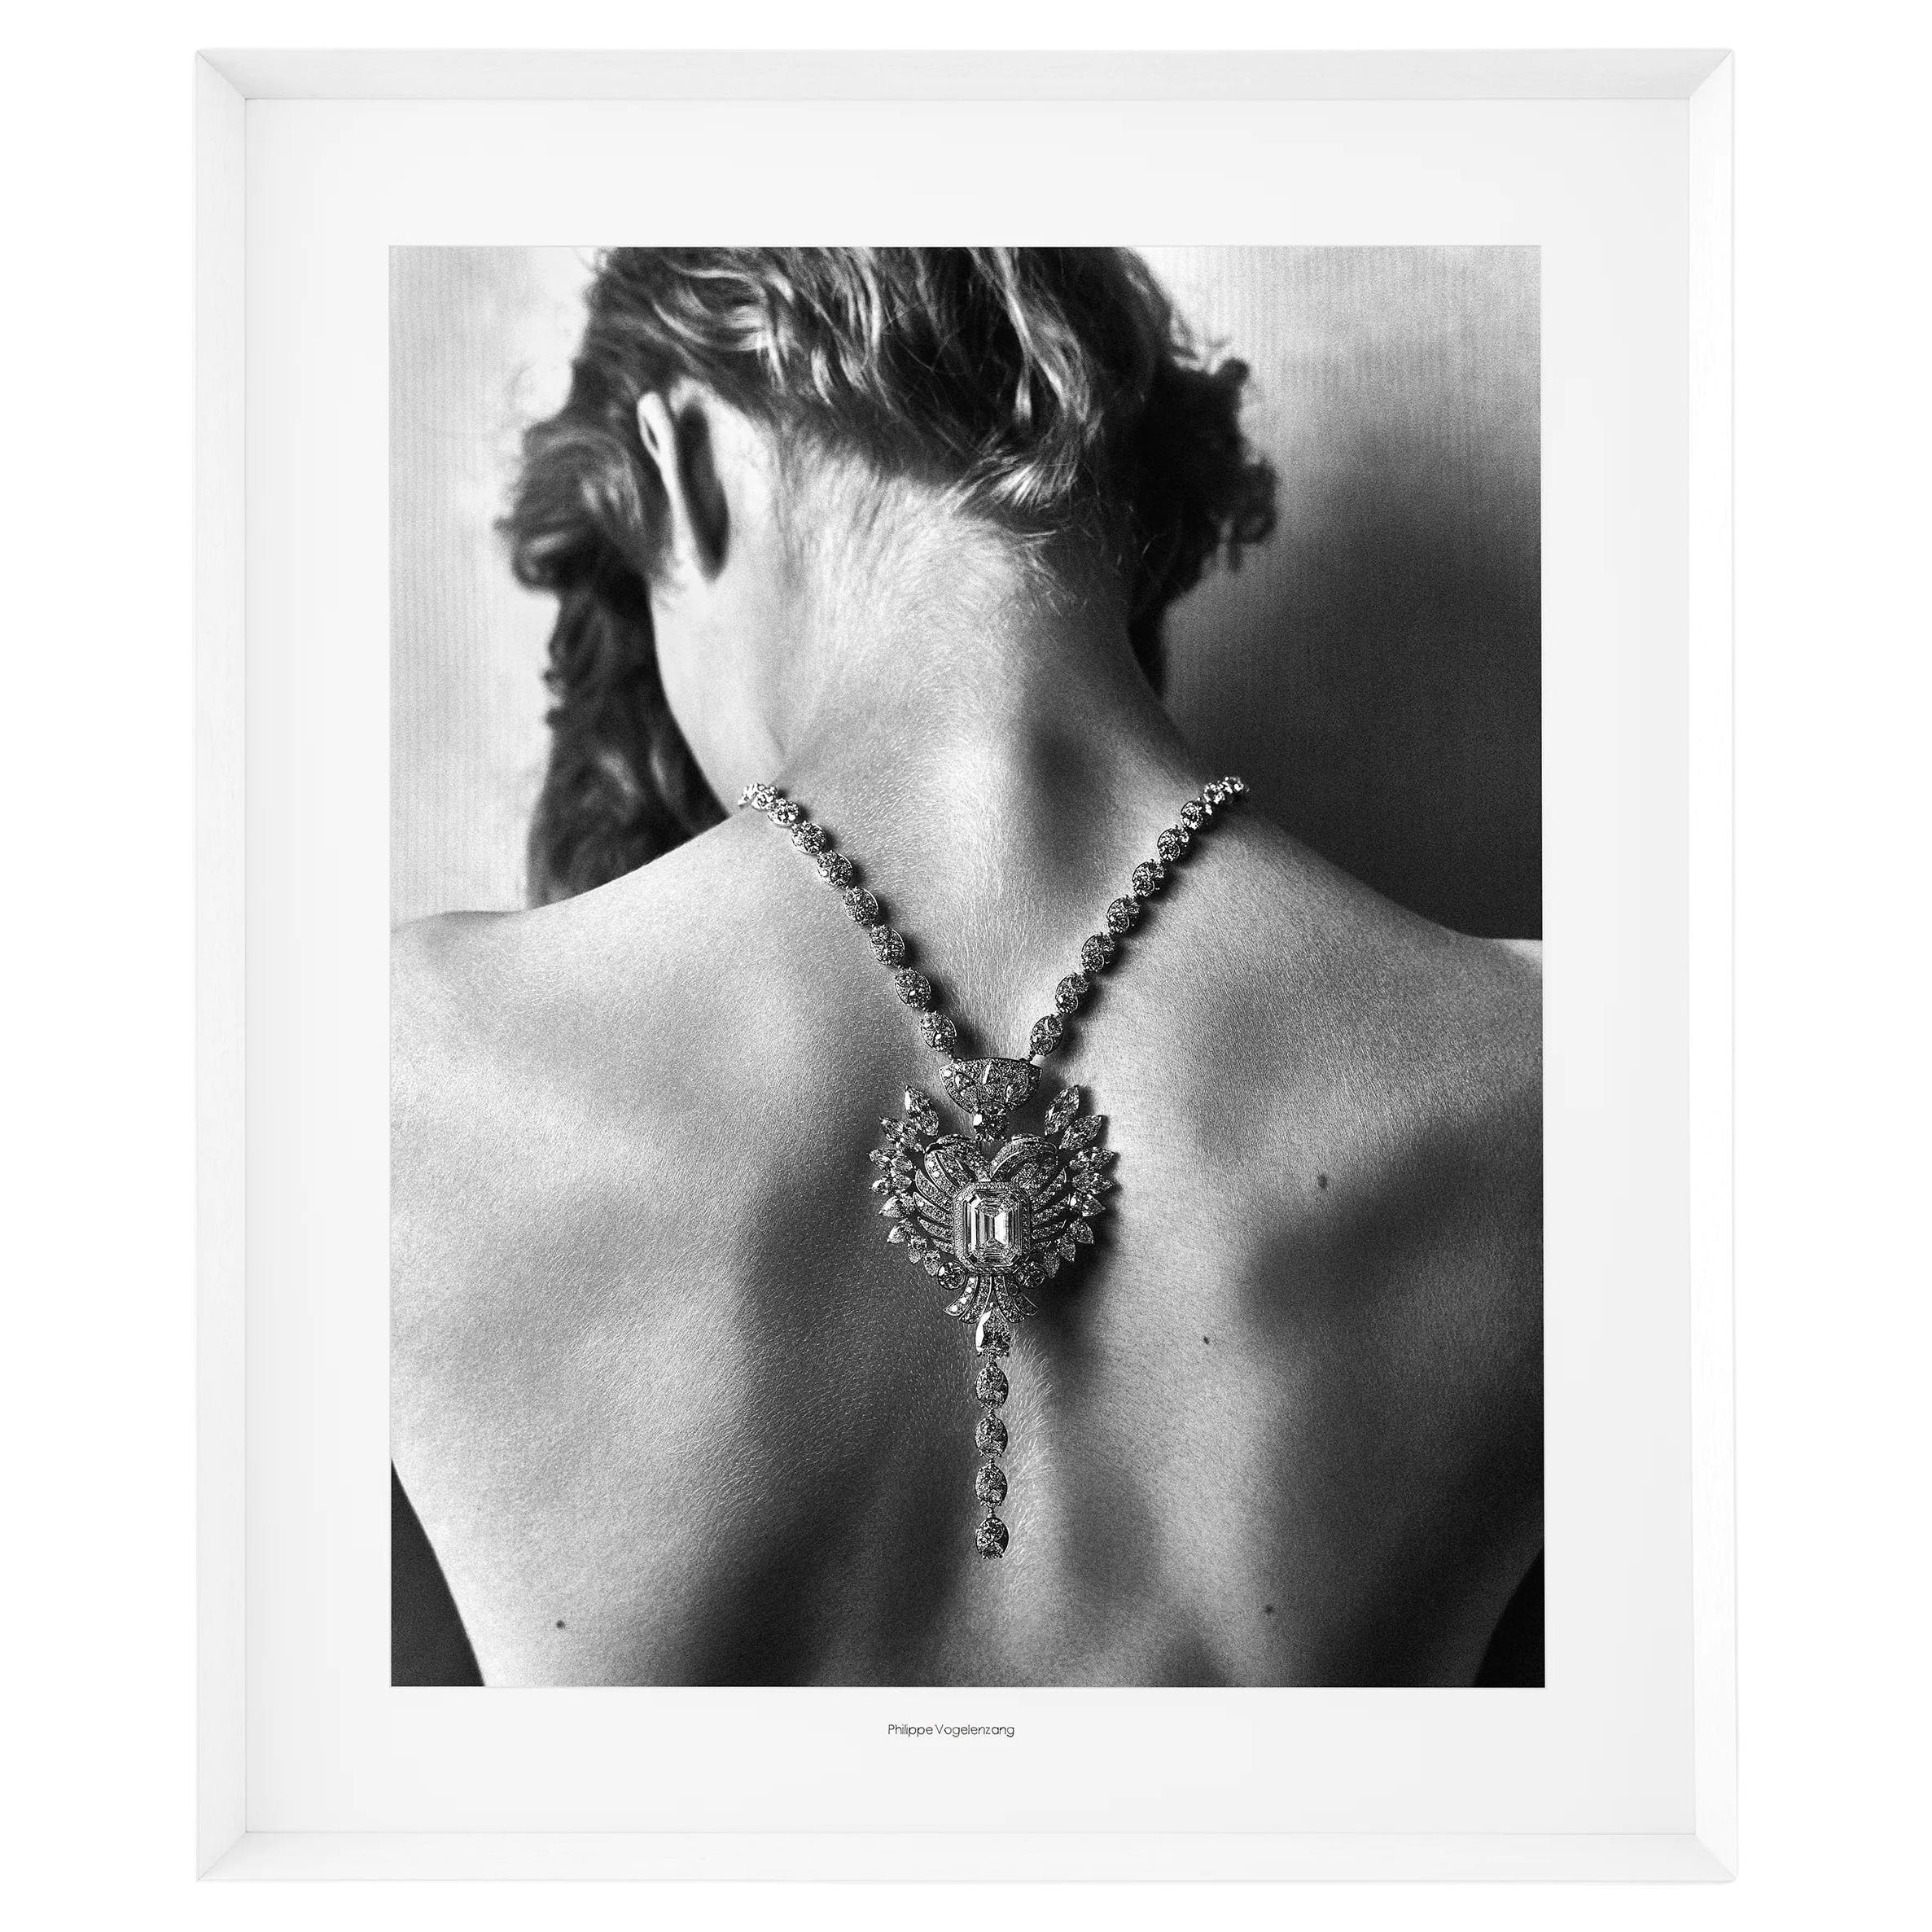  Print Philippe Vogelenzang, the Neck